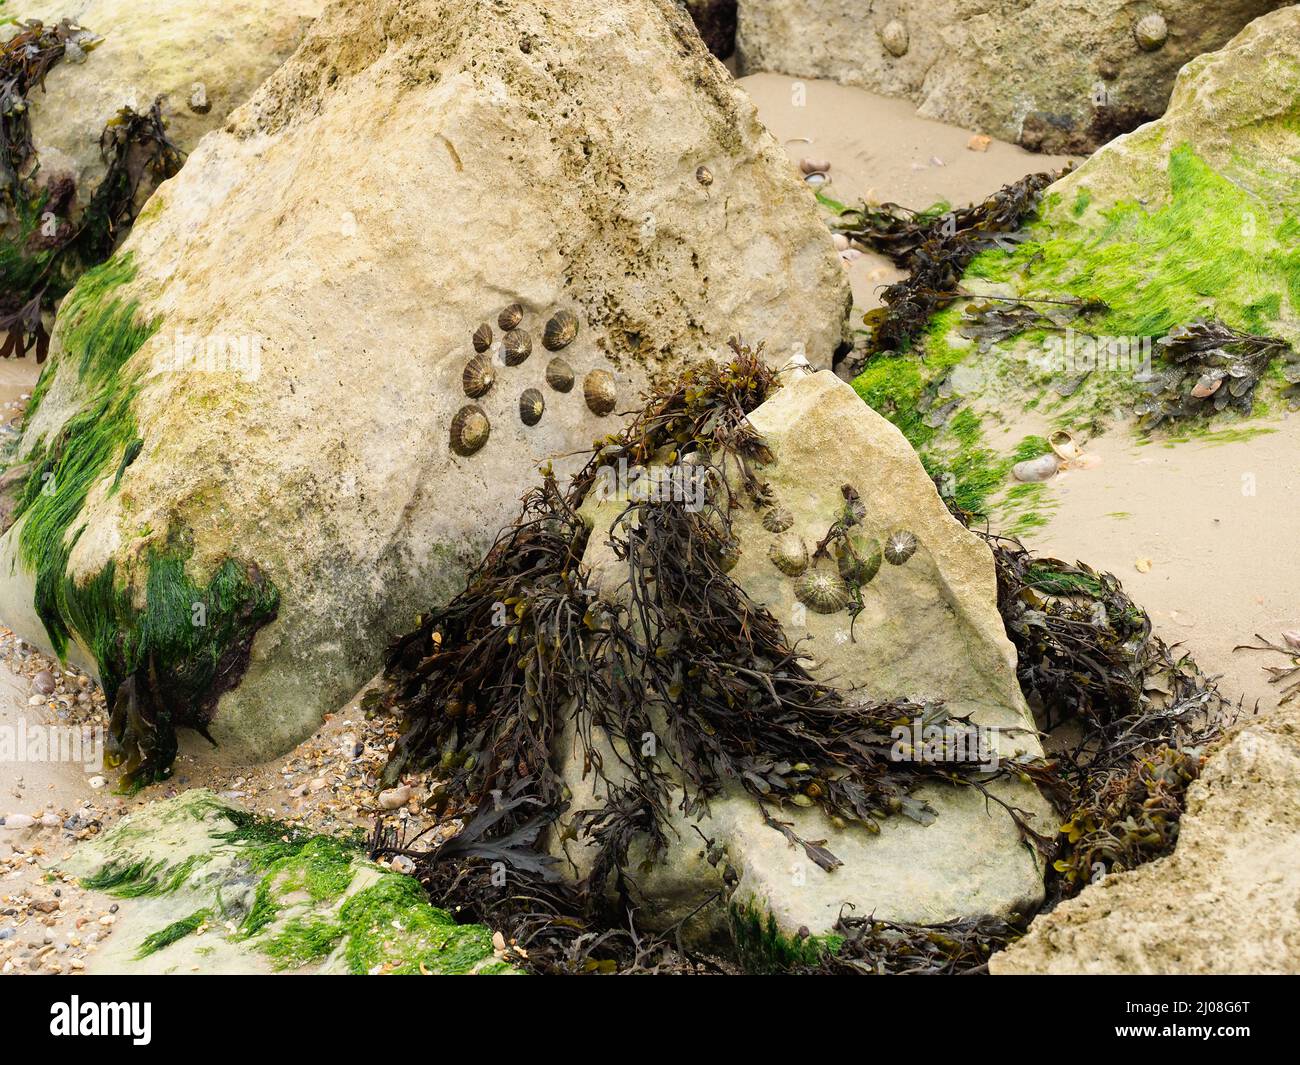 Barnacles and seaweed growing and clinging to some rocks at the beach Stock Photo